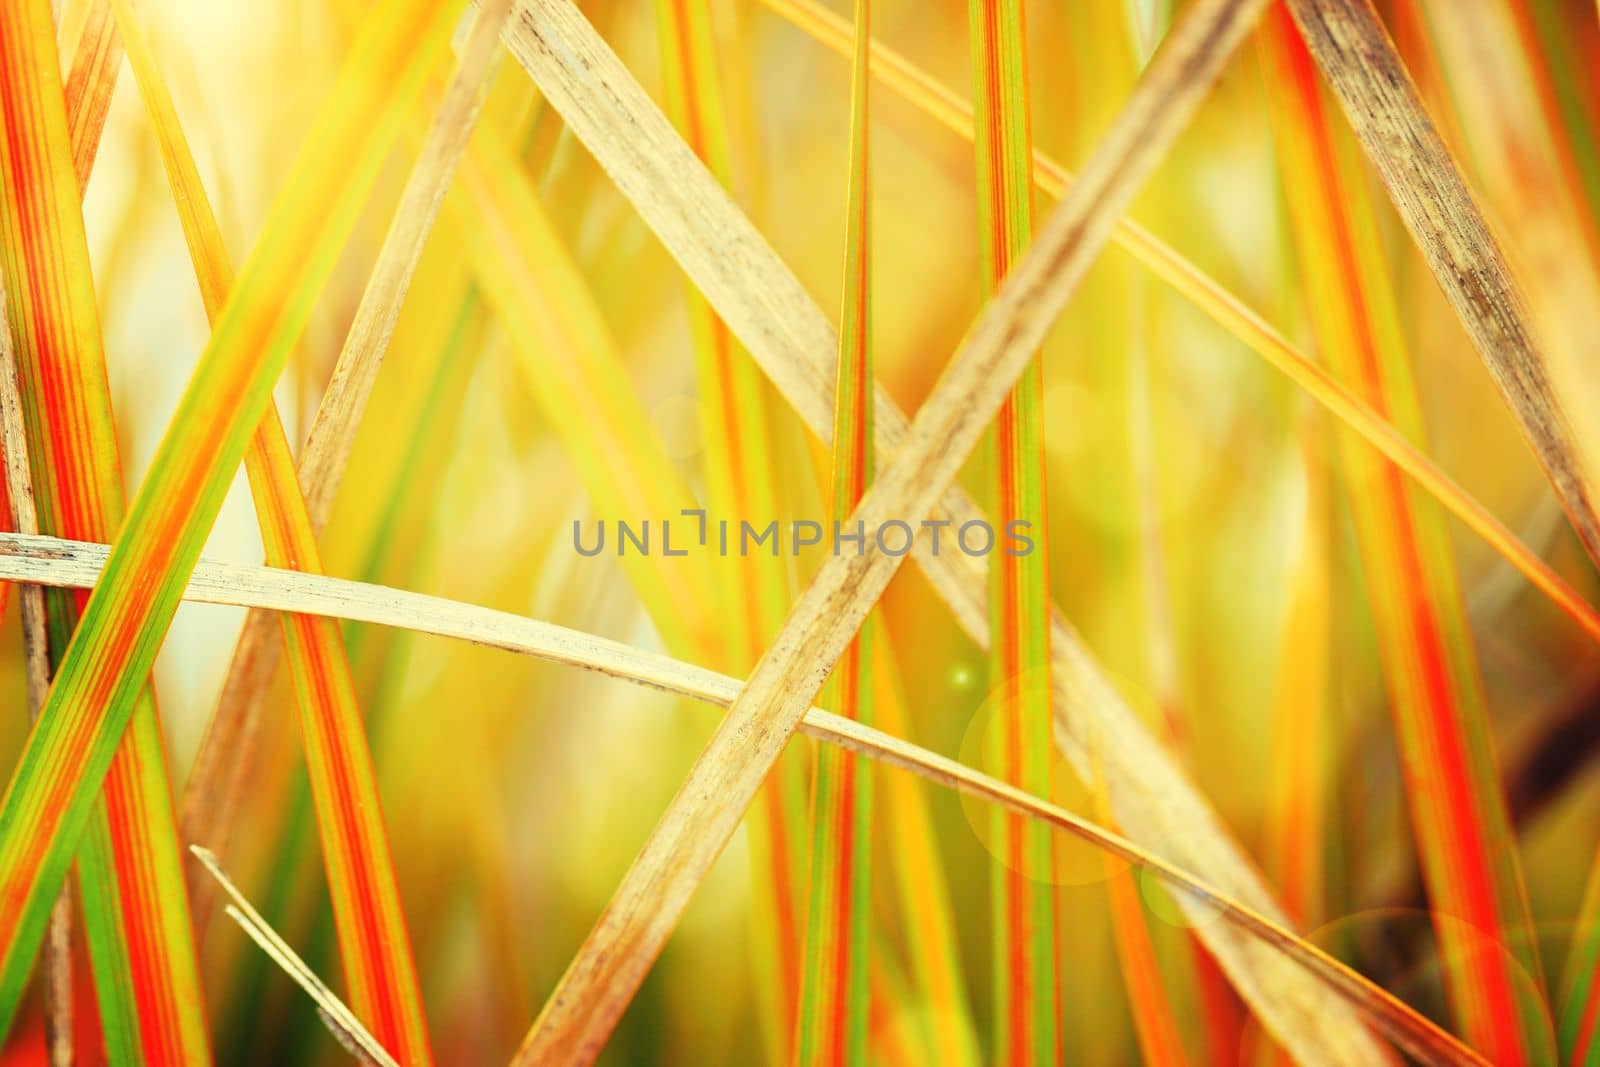 A photo of harvest time. A closeup of a plant - ALL design on this image is created from scratch by Yuri Arcurs team of professionals for this particular photo shoot. by YuriArcurs